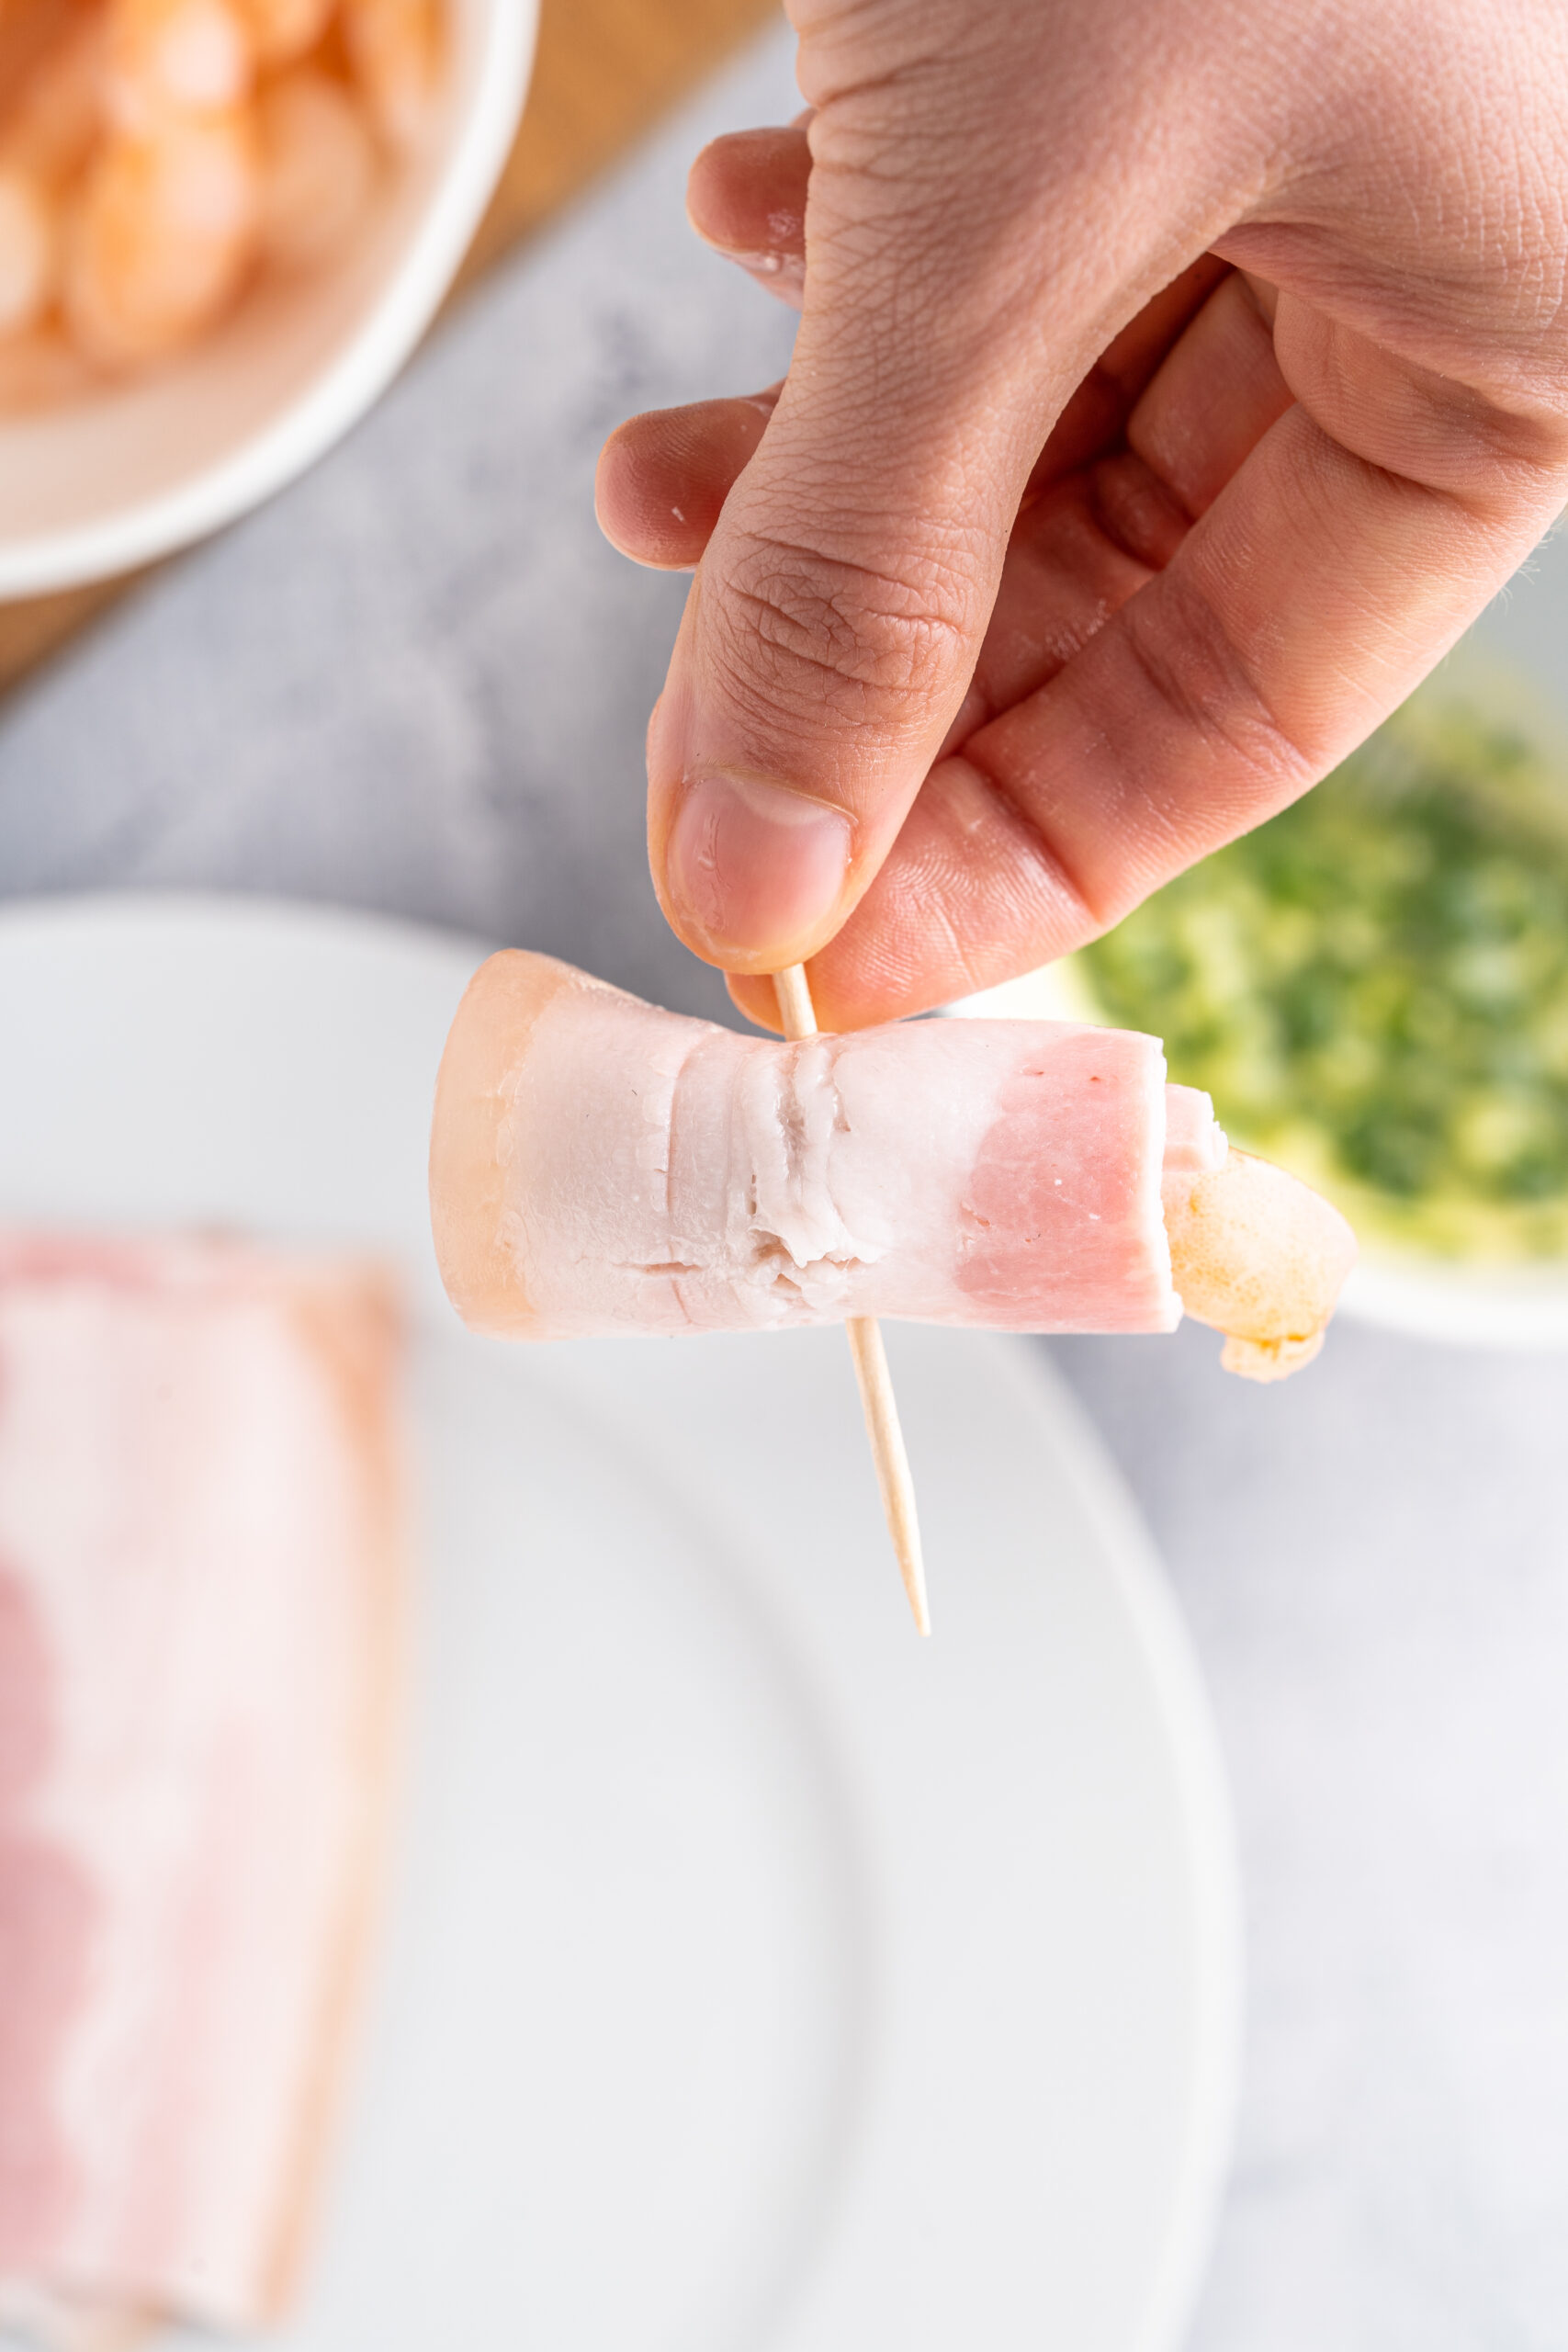 Placing toothpick in bacon shrimp.